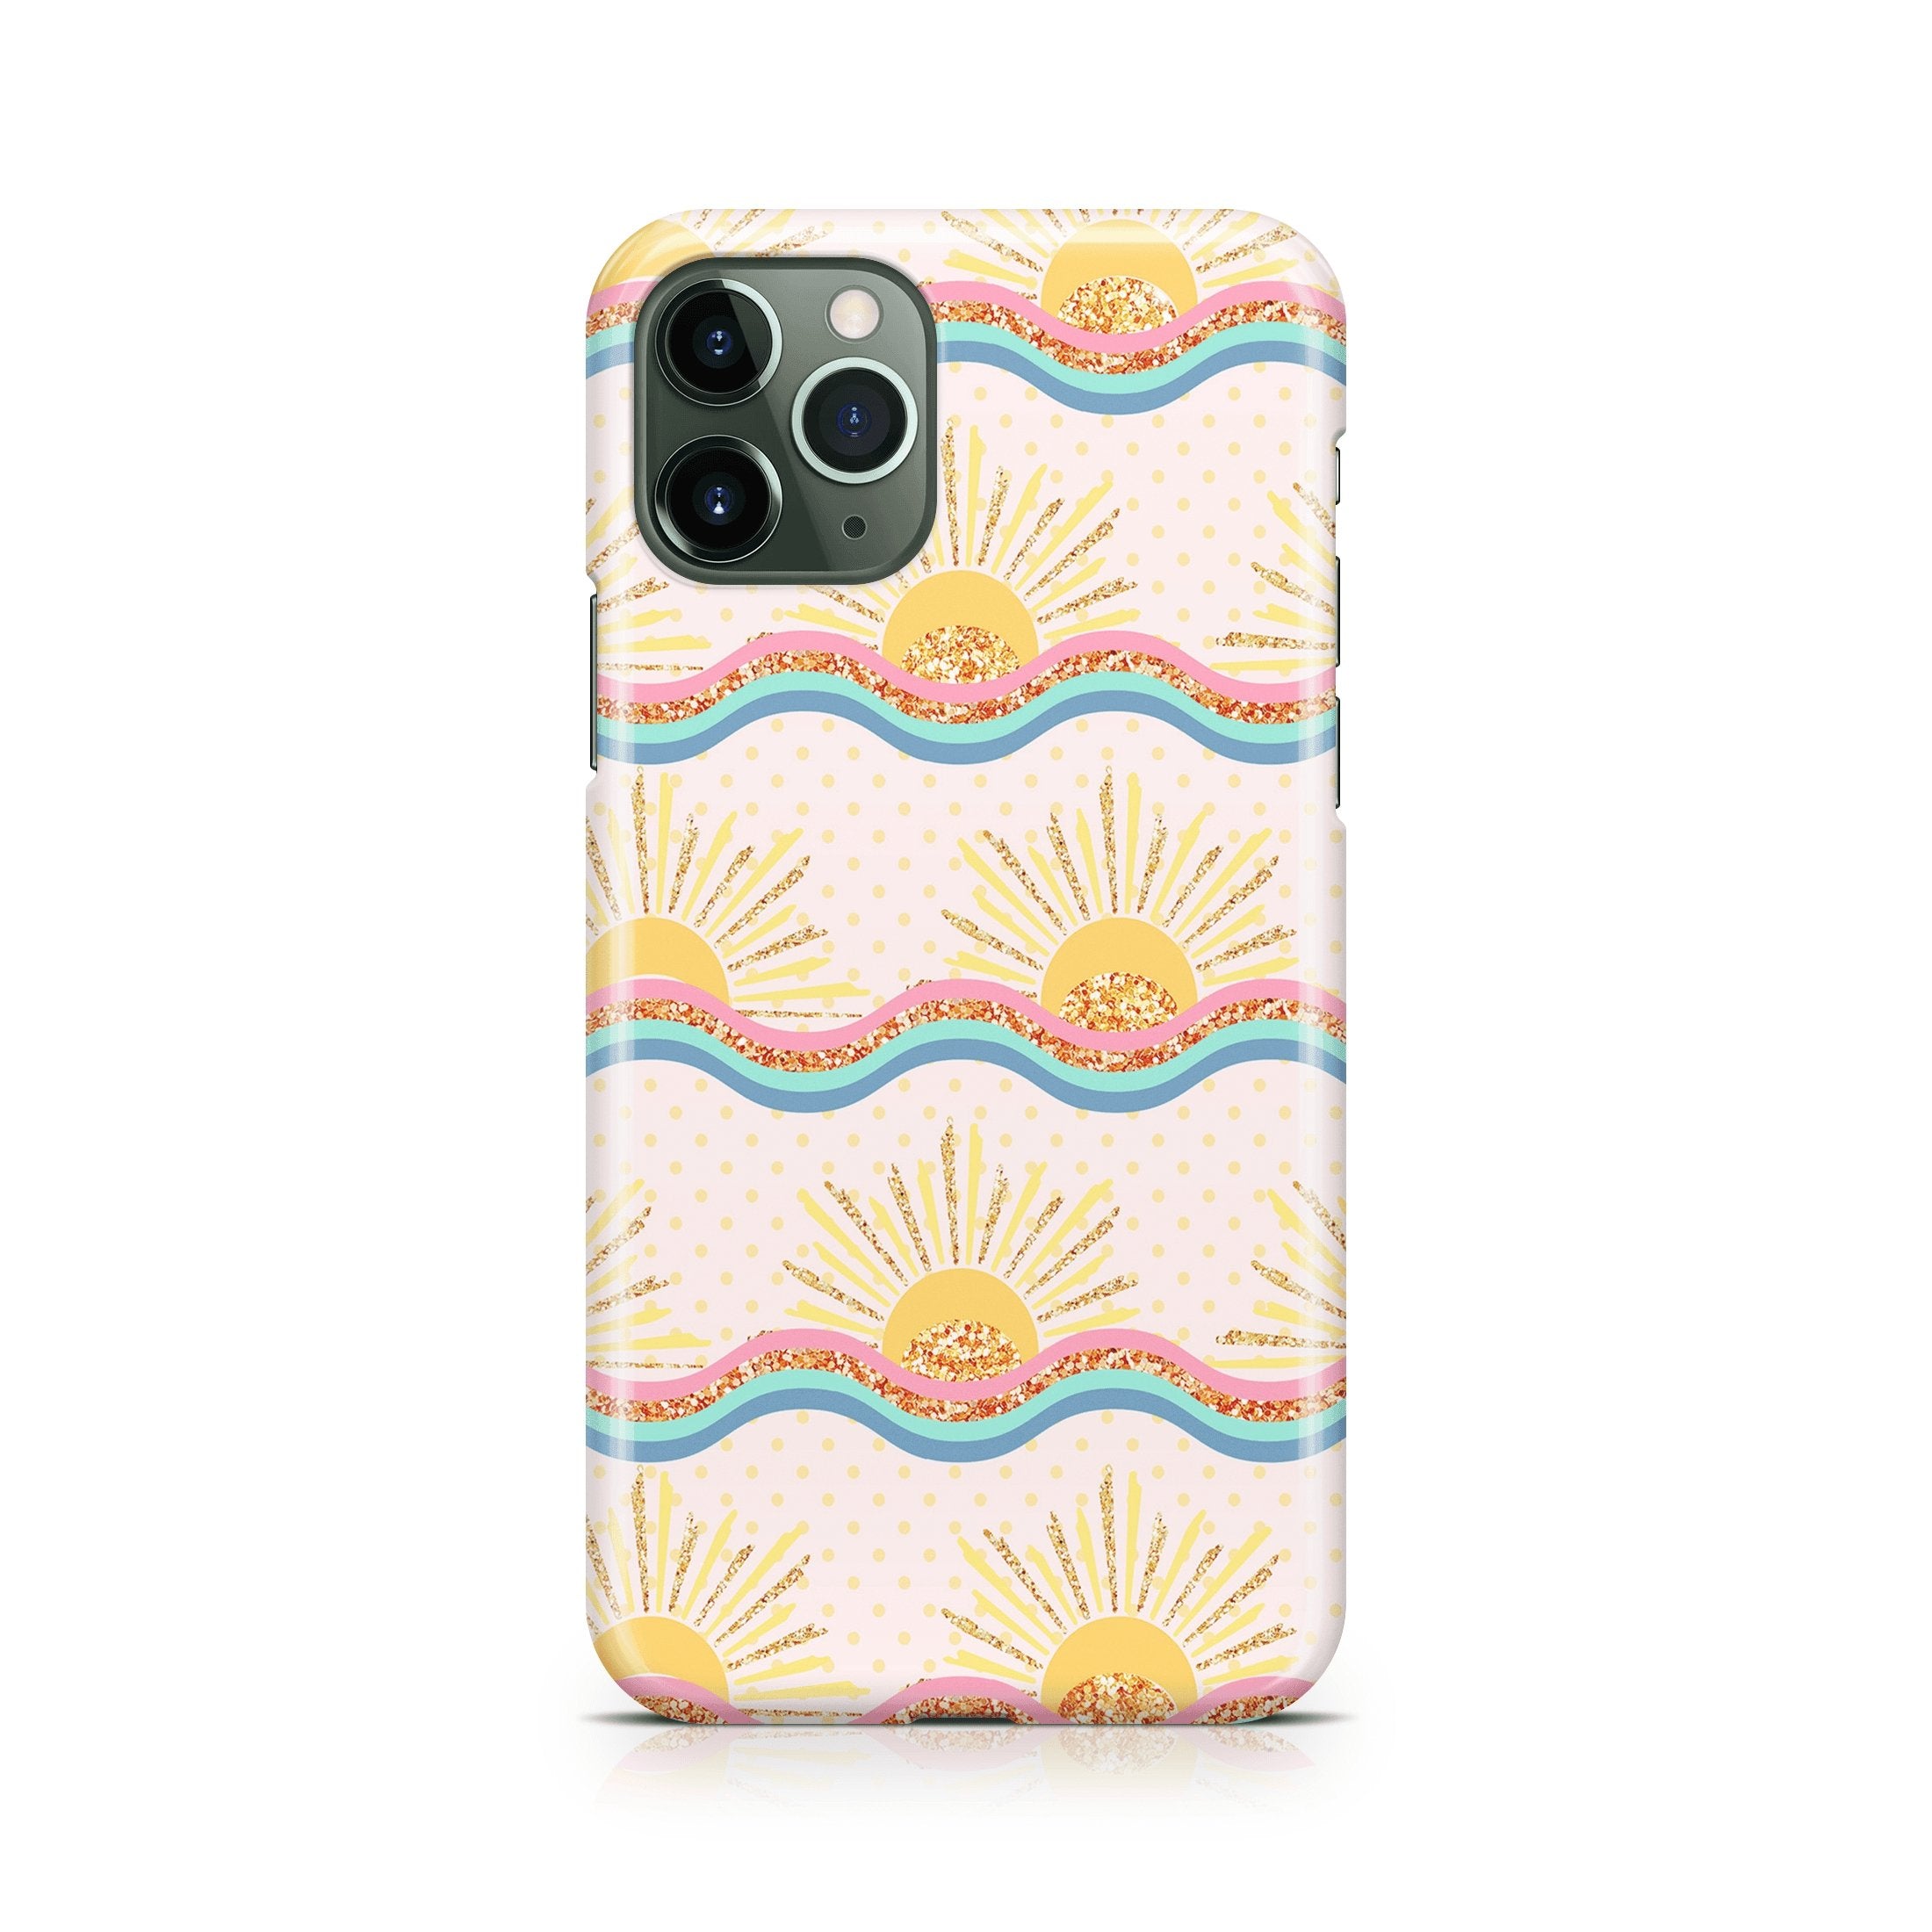 Happy Sun - iPhone phone case designs by CaseSwagger